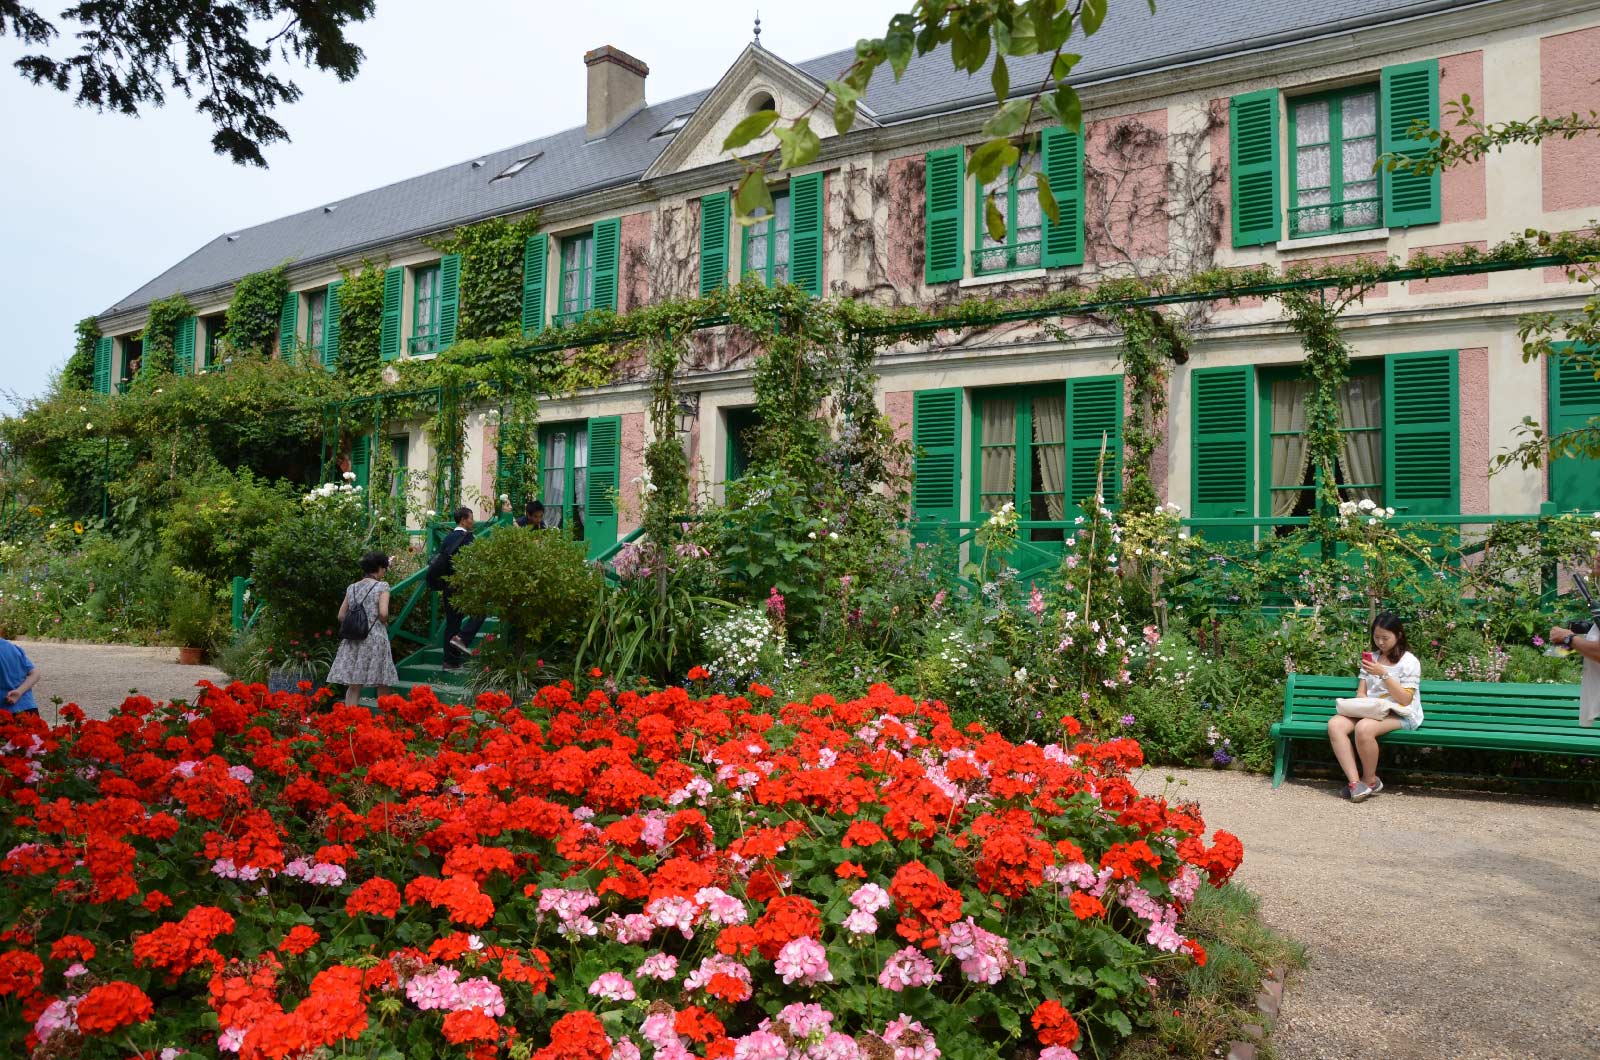 Visit Giverny, Claude Monet garden and house - Normandy Tourism, France